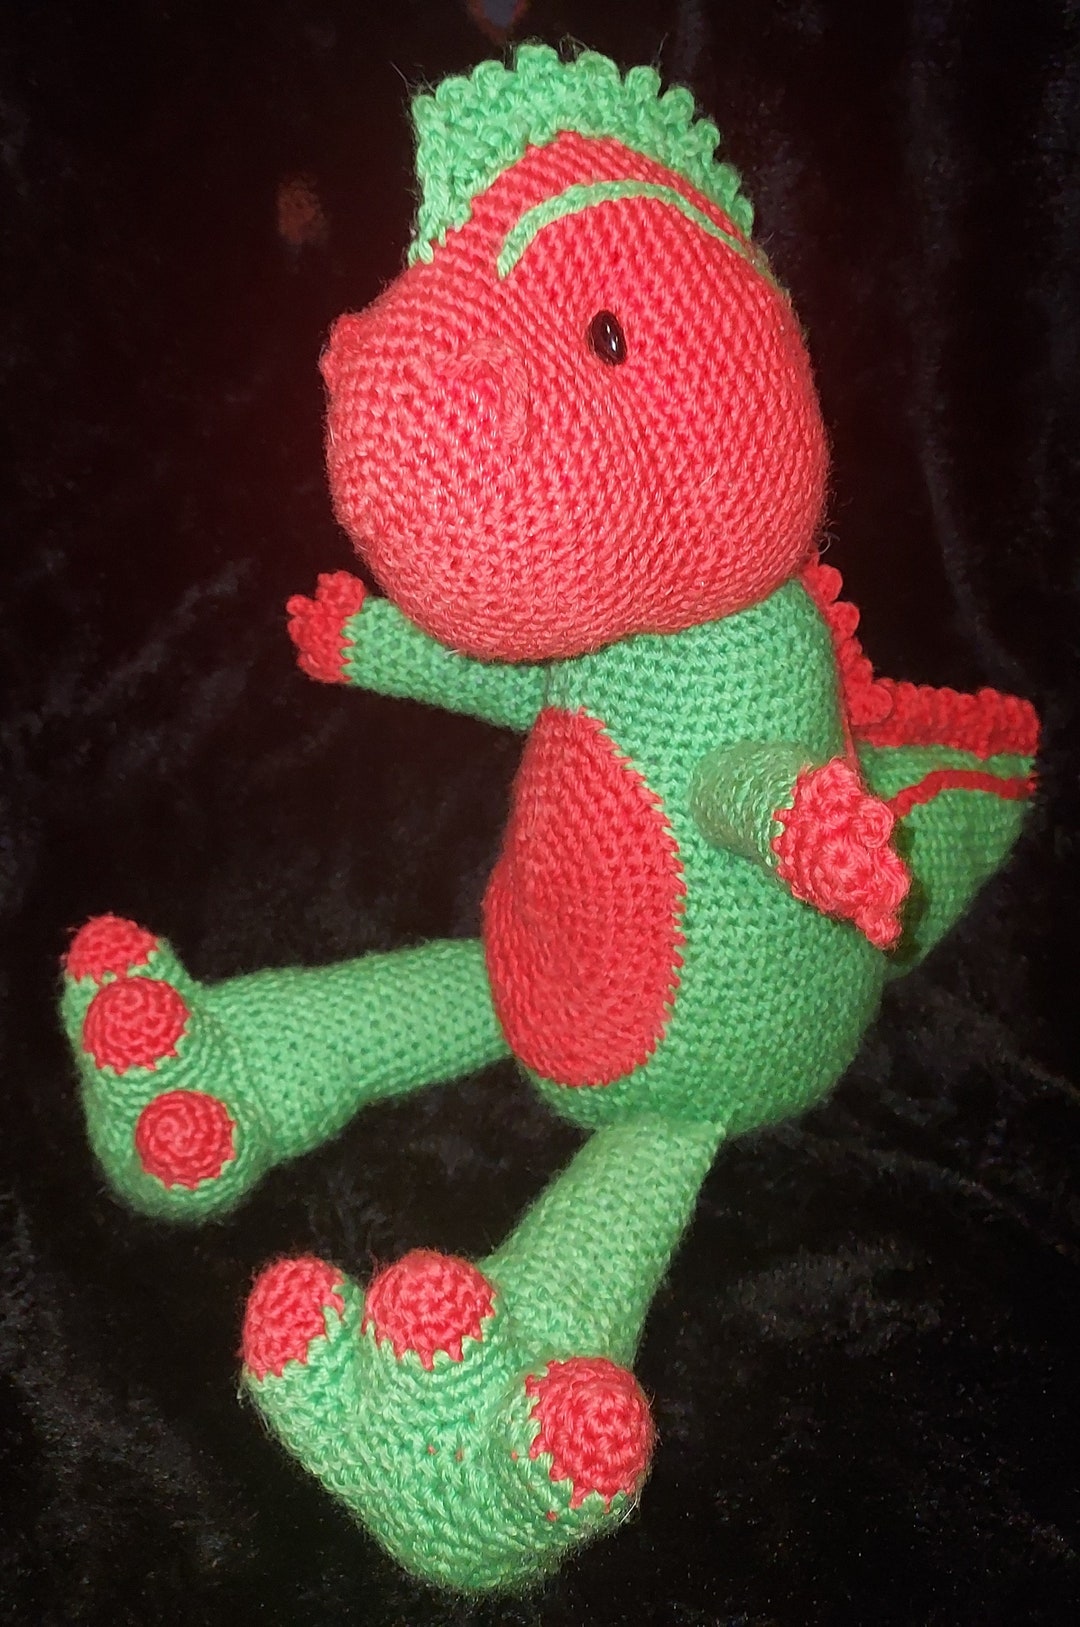 Made to Order Crocheted Stuffed Animal